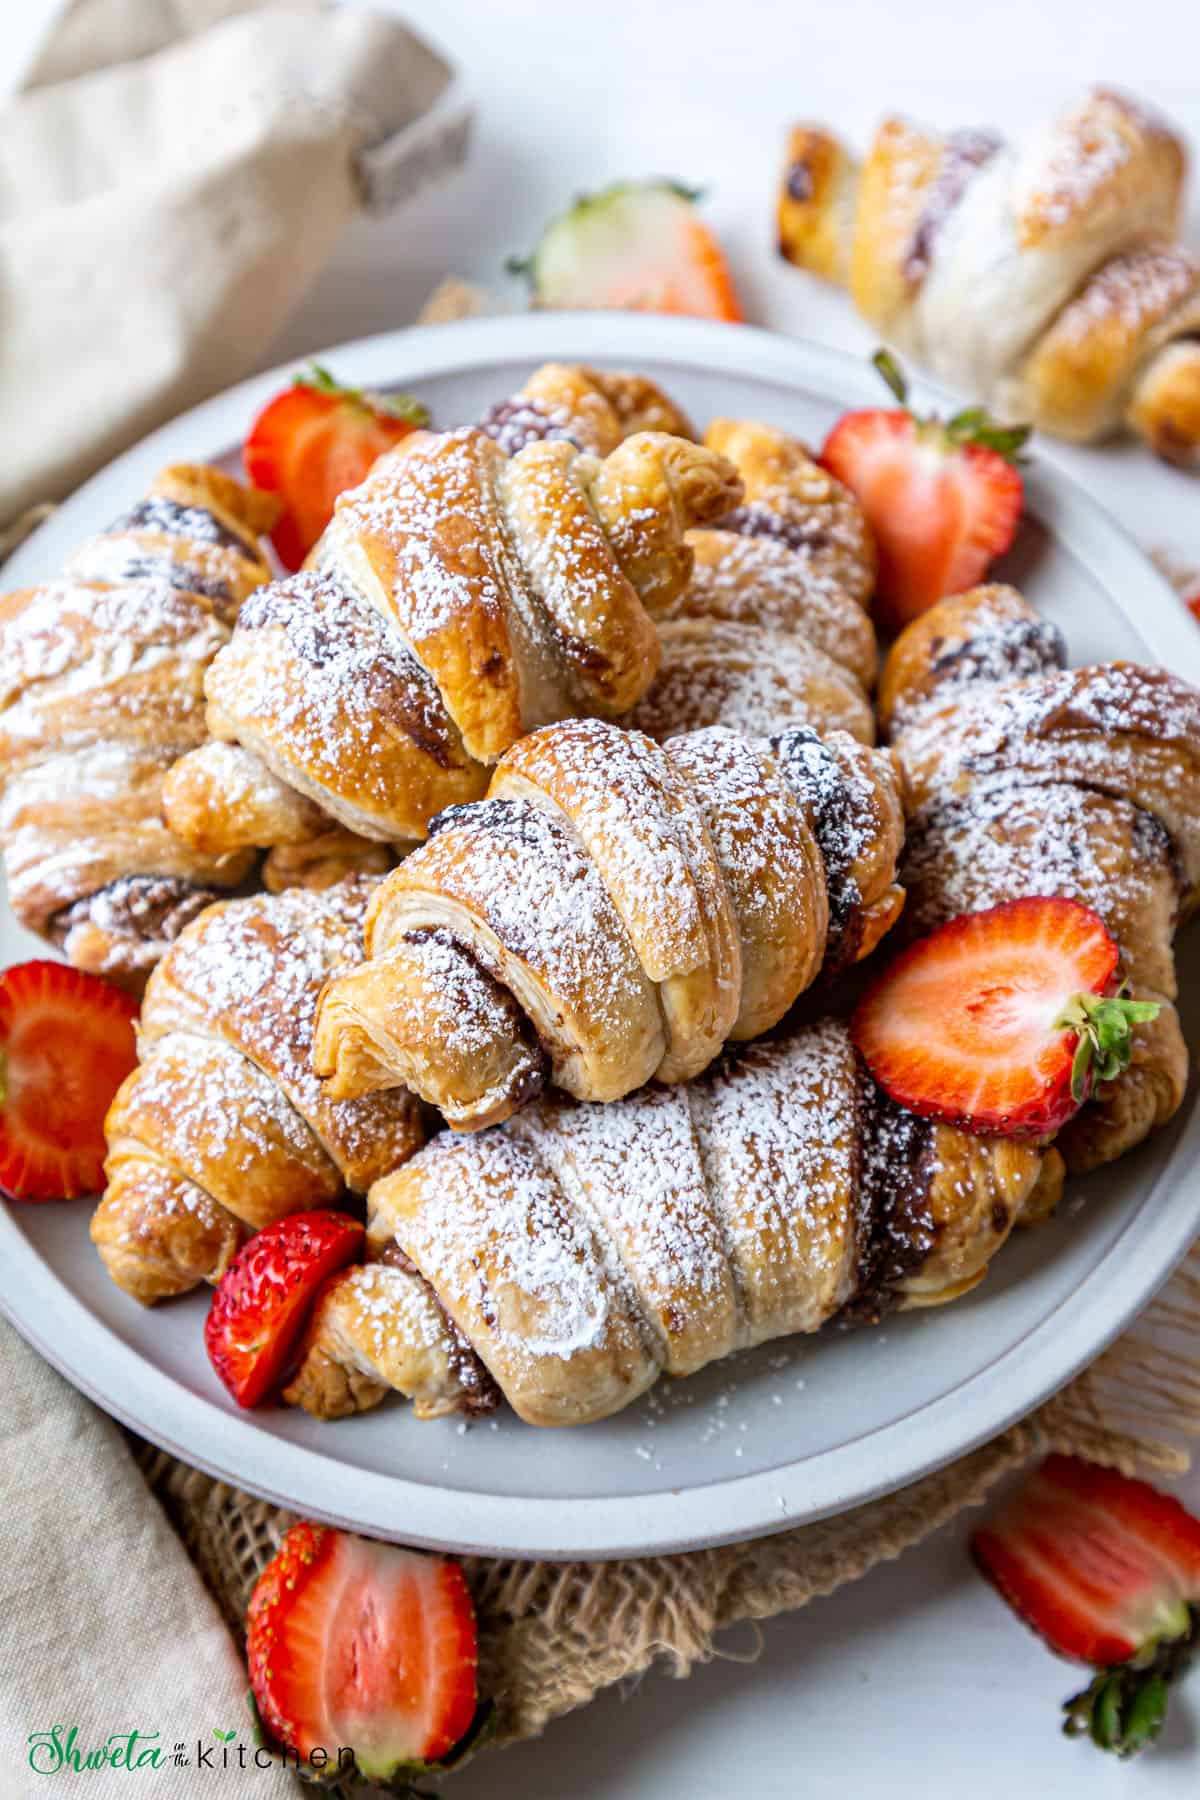 Nutella croissants dusted with powdered sugar piled on a plate along with cut strawberries